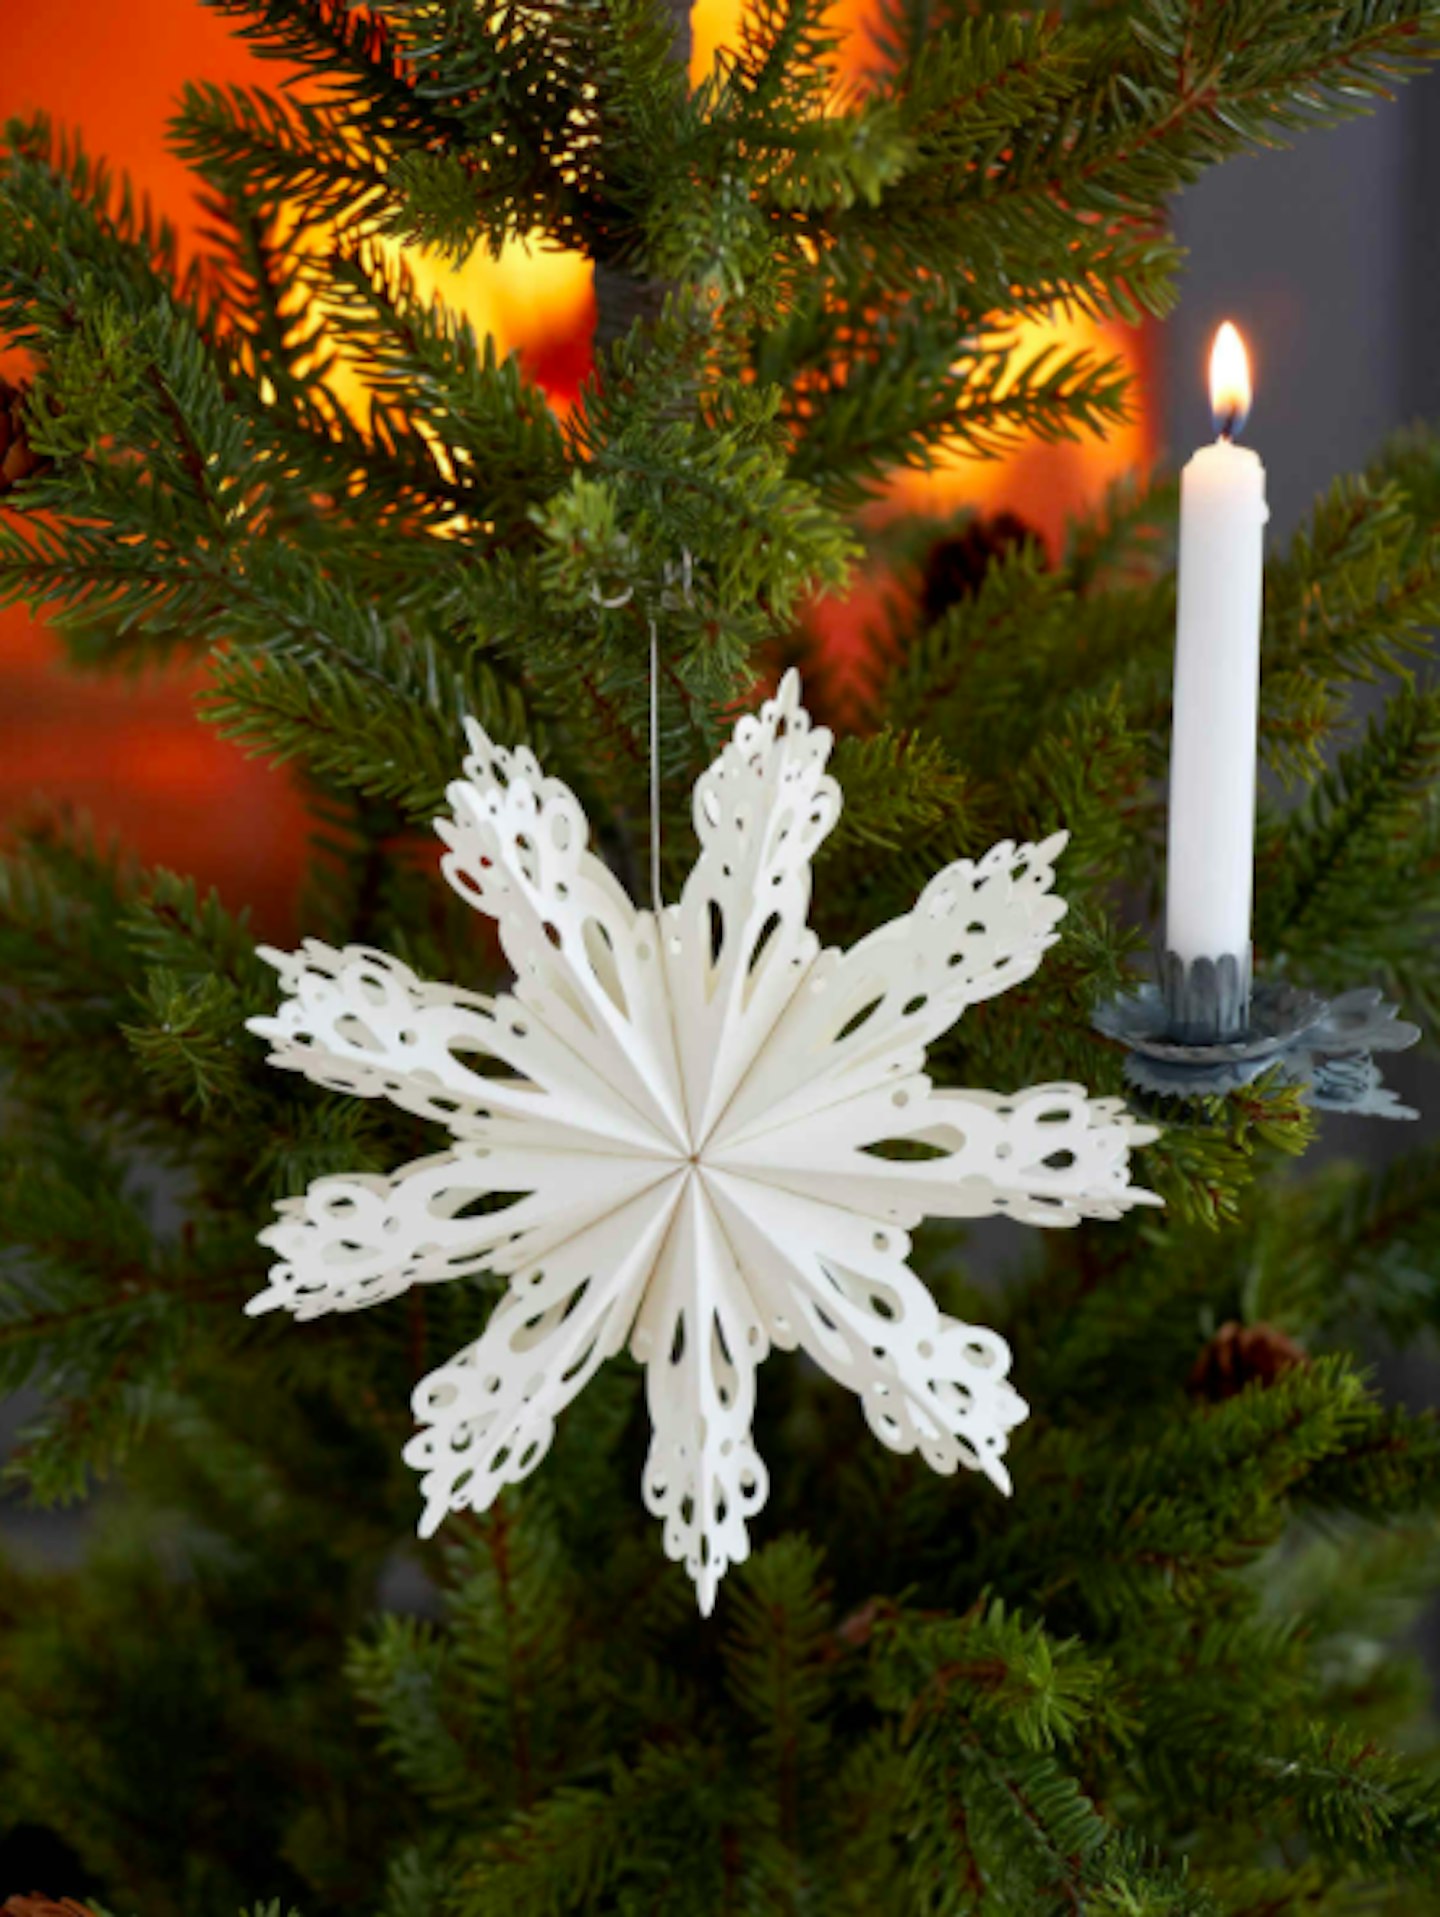 Christmas 2020: Christmas Tree Decorations Trends - Snowy White